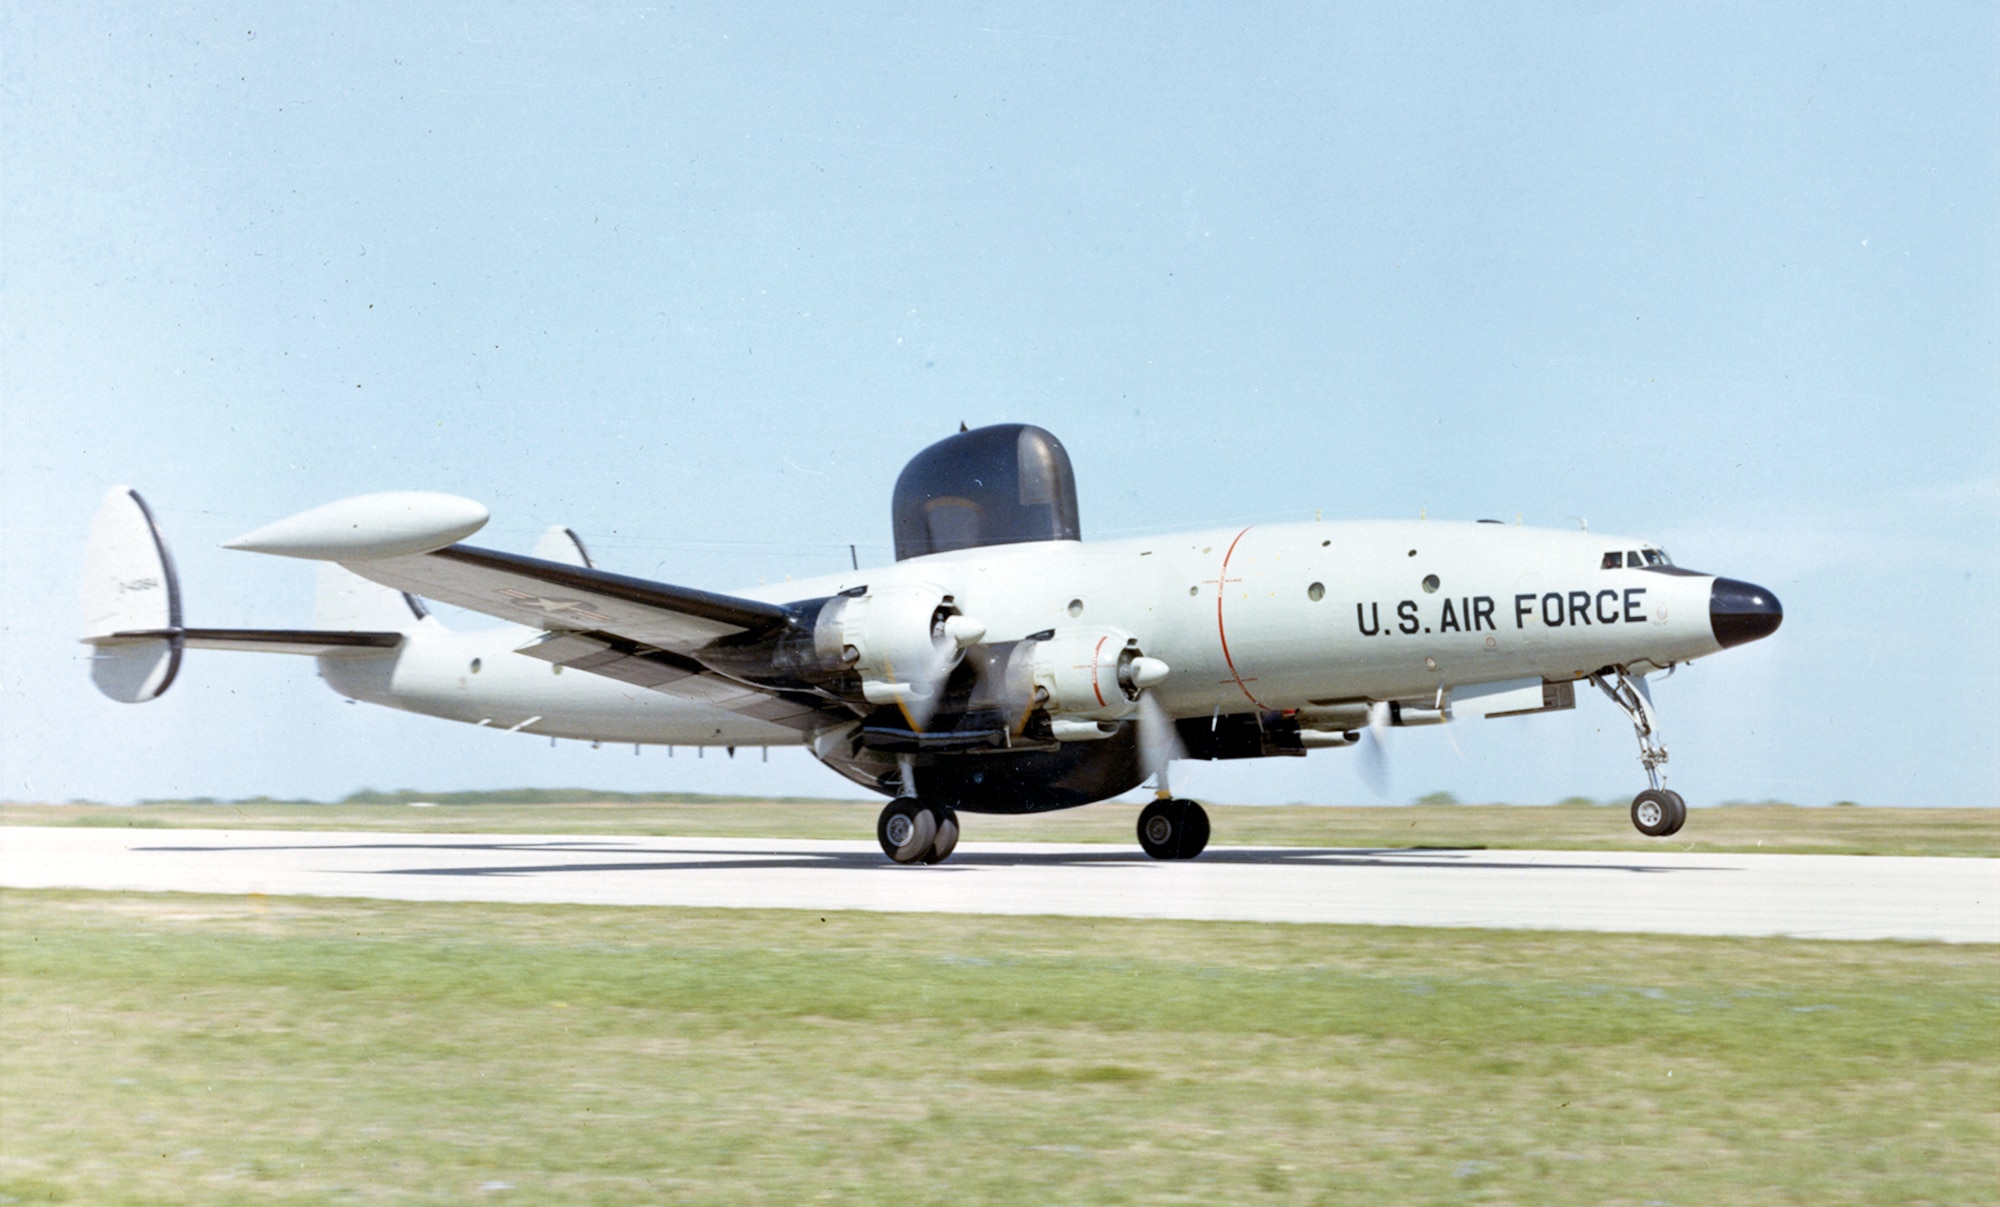 Specialized EC-121s -- like this EC-121K RIVET TOP -- listened in on radio calls between MiG fighters and their ground controllers. The EC-121 crew then passed on real-time warnings to U.S. pilots. (U.S. Air Force photo)